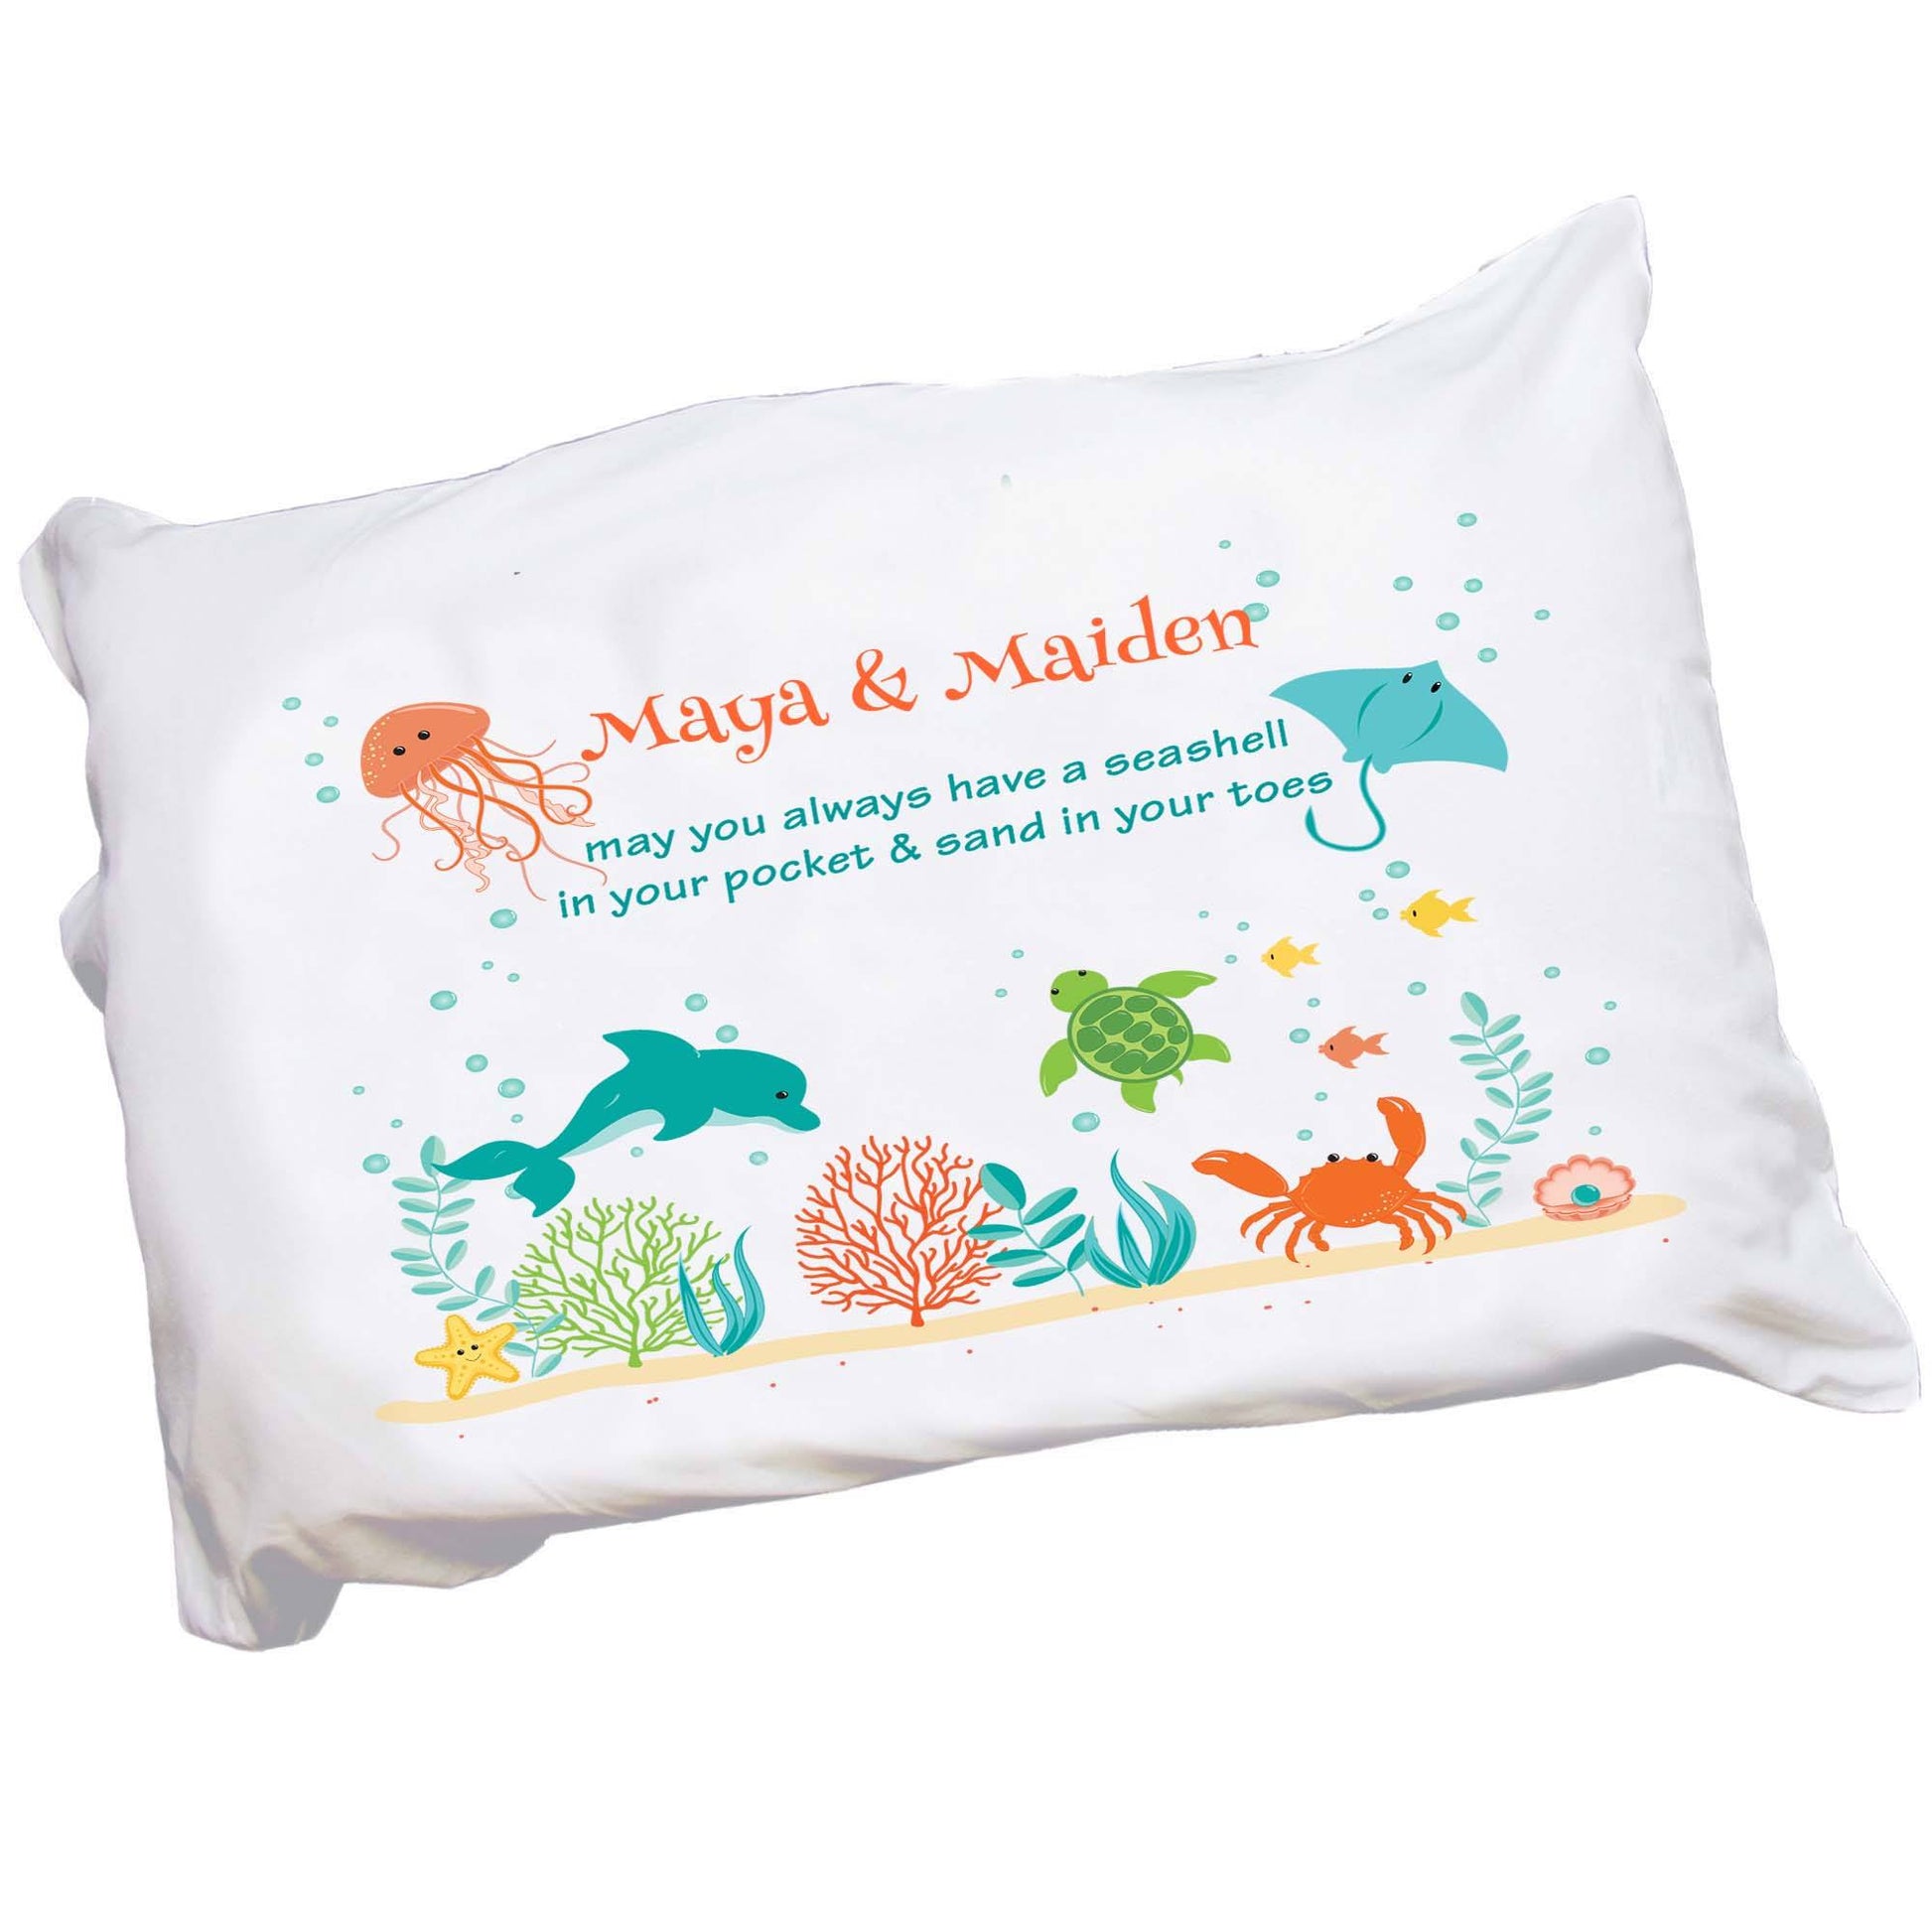 Personalized Childrens Pillowcase with Sealife animals design